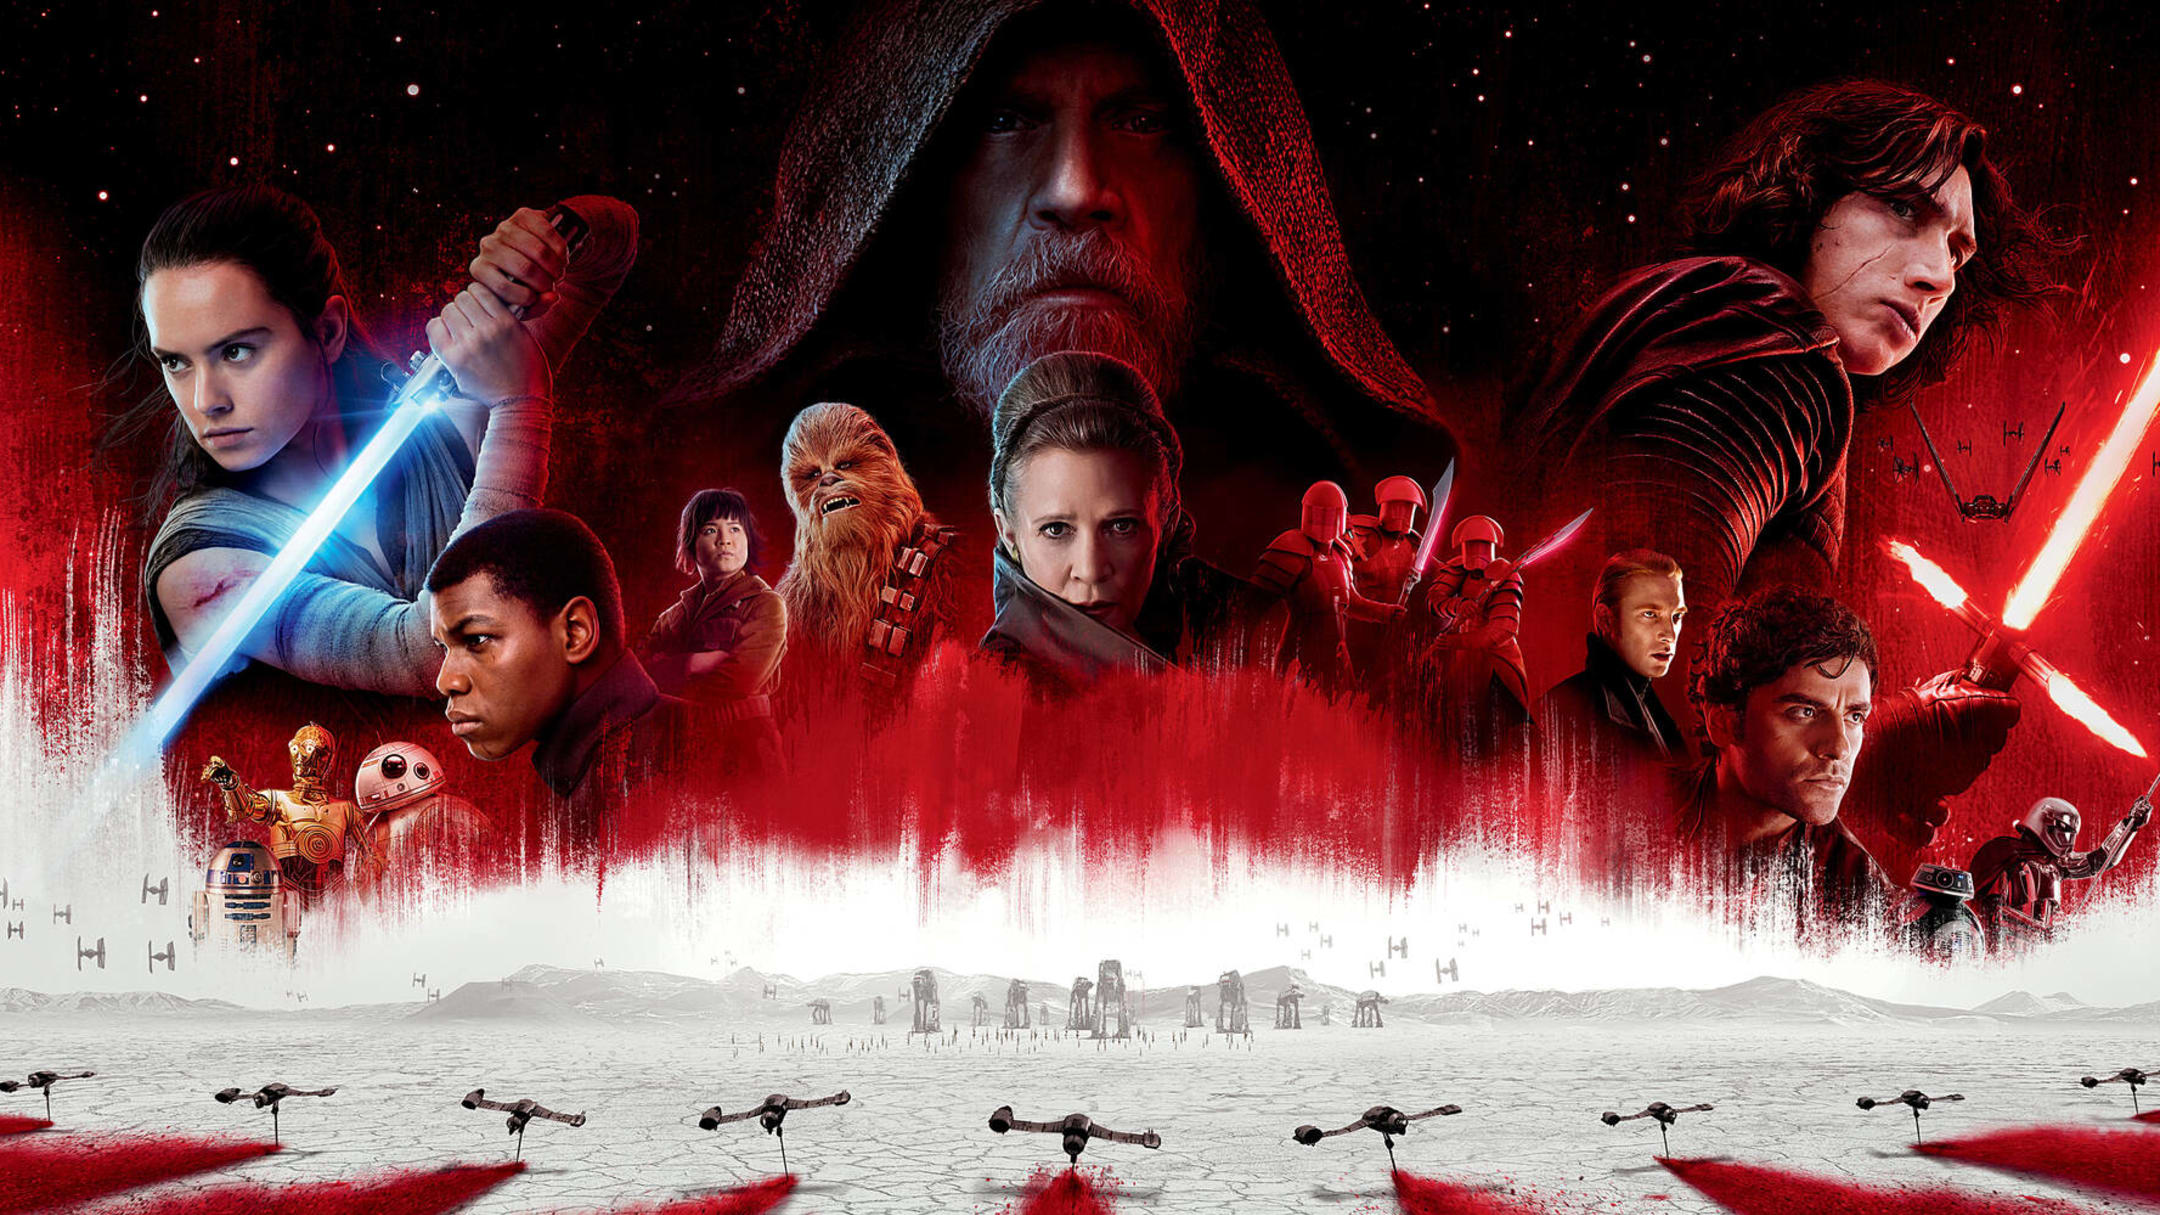 10 The Last Jedi Characters That Can Come to Star Wars: Galaxy of